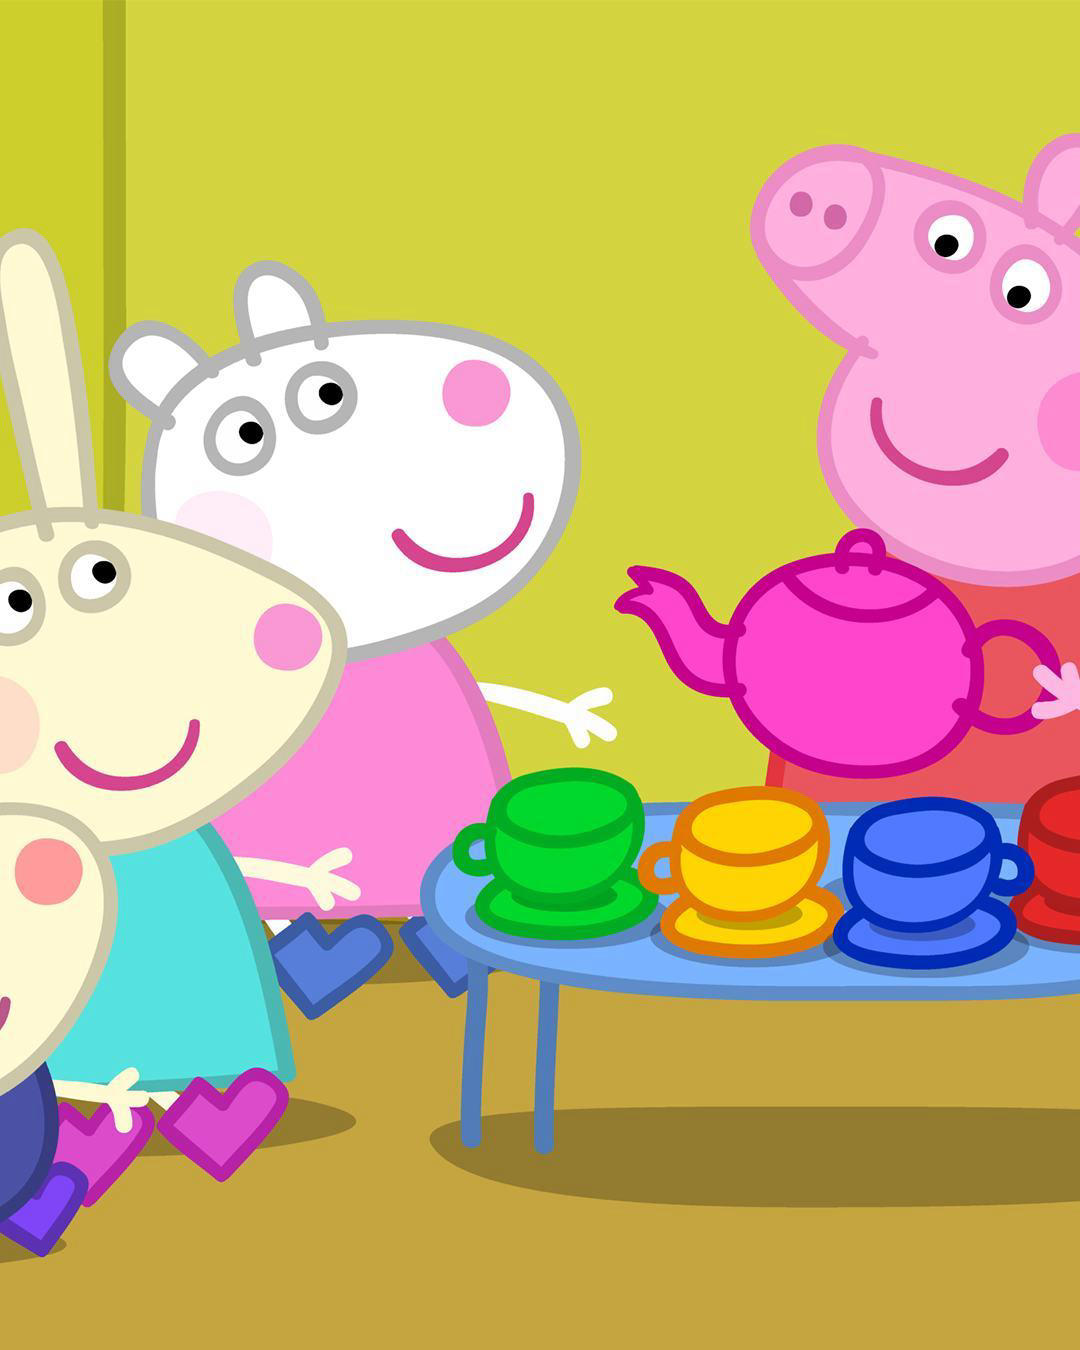 Peppa Pig - Any time is the perfect time to host a tea party